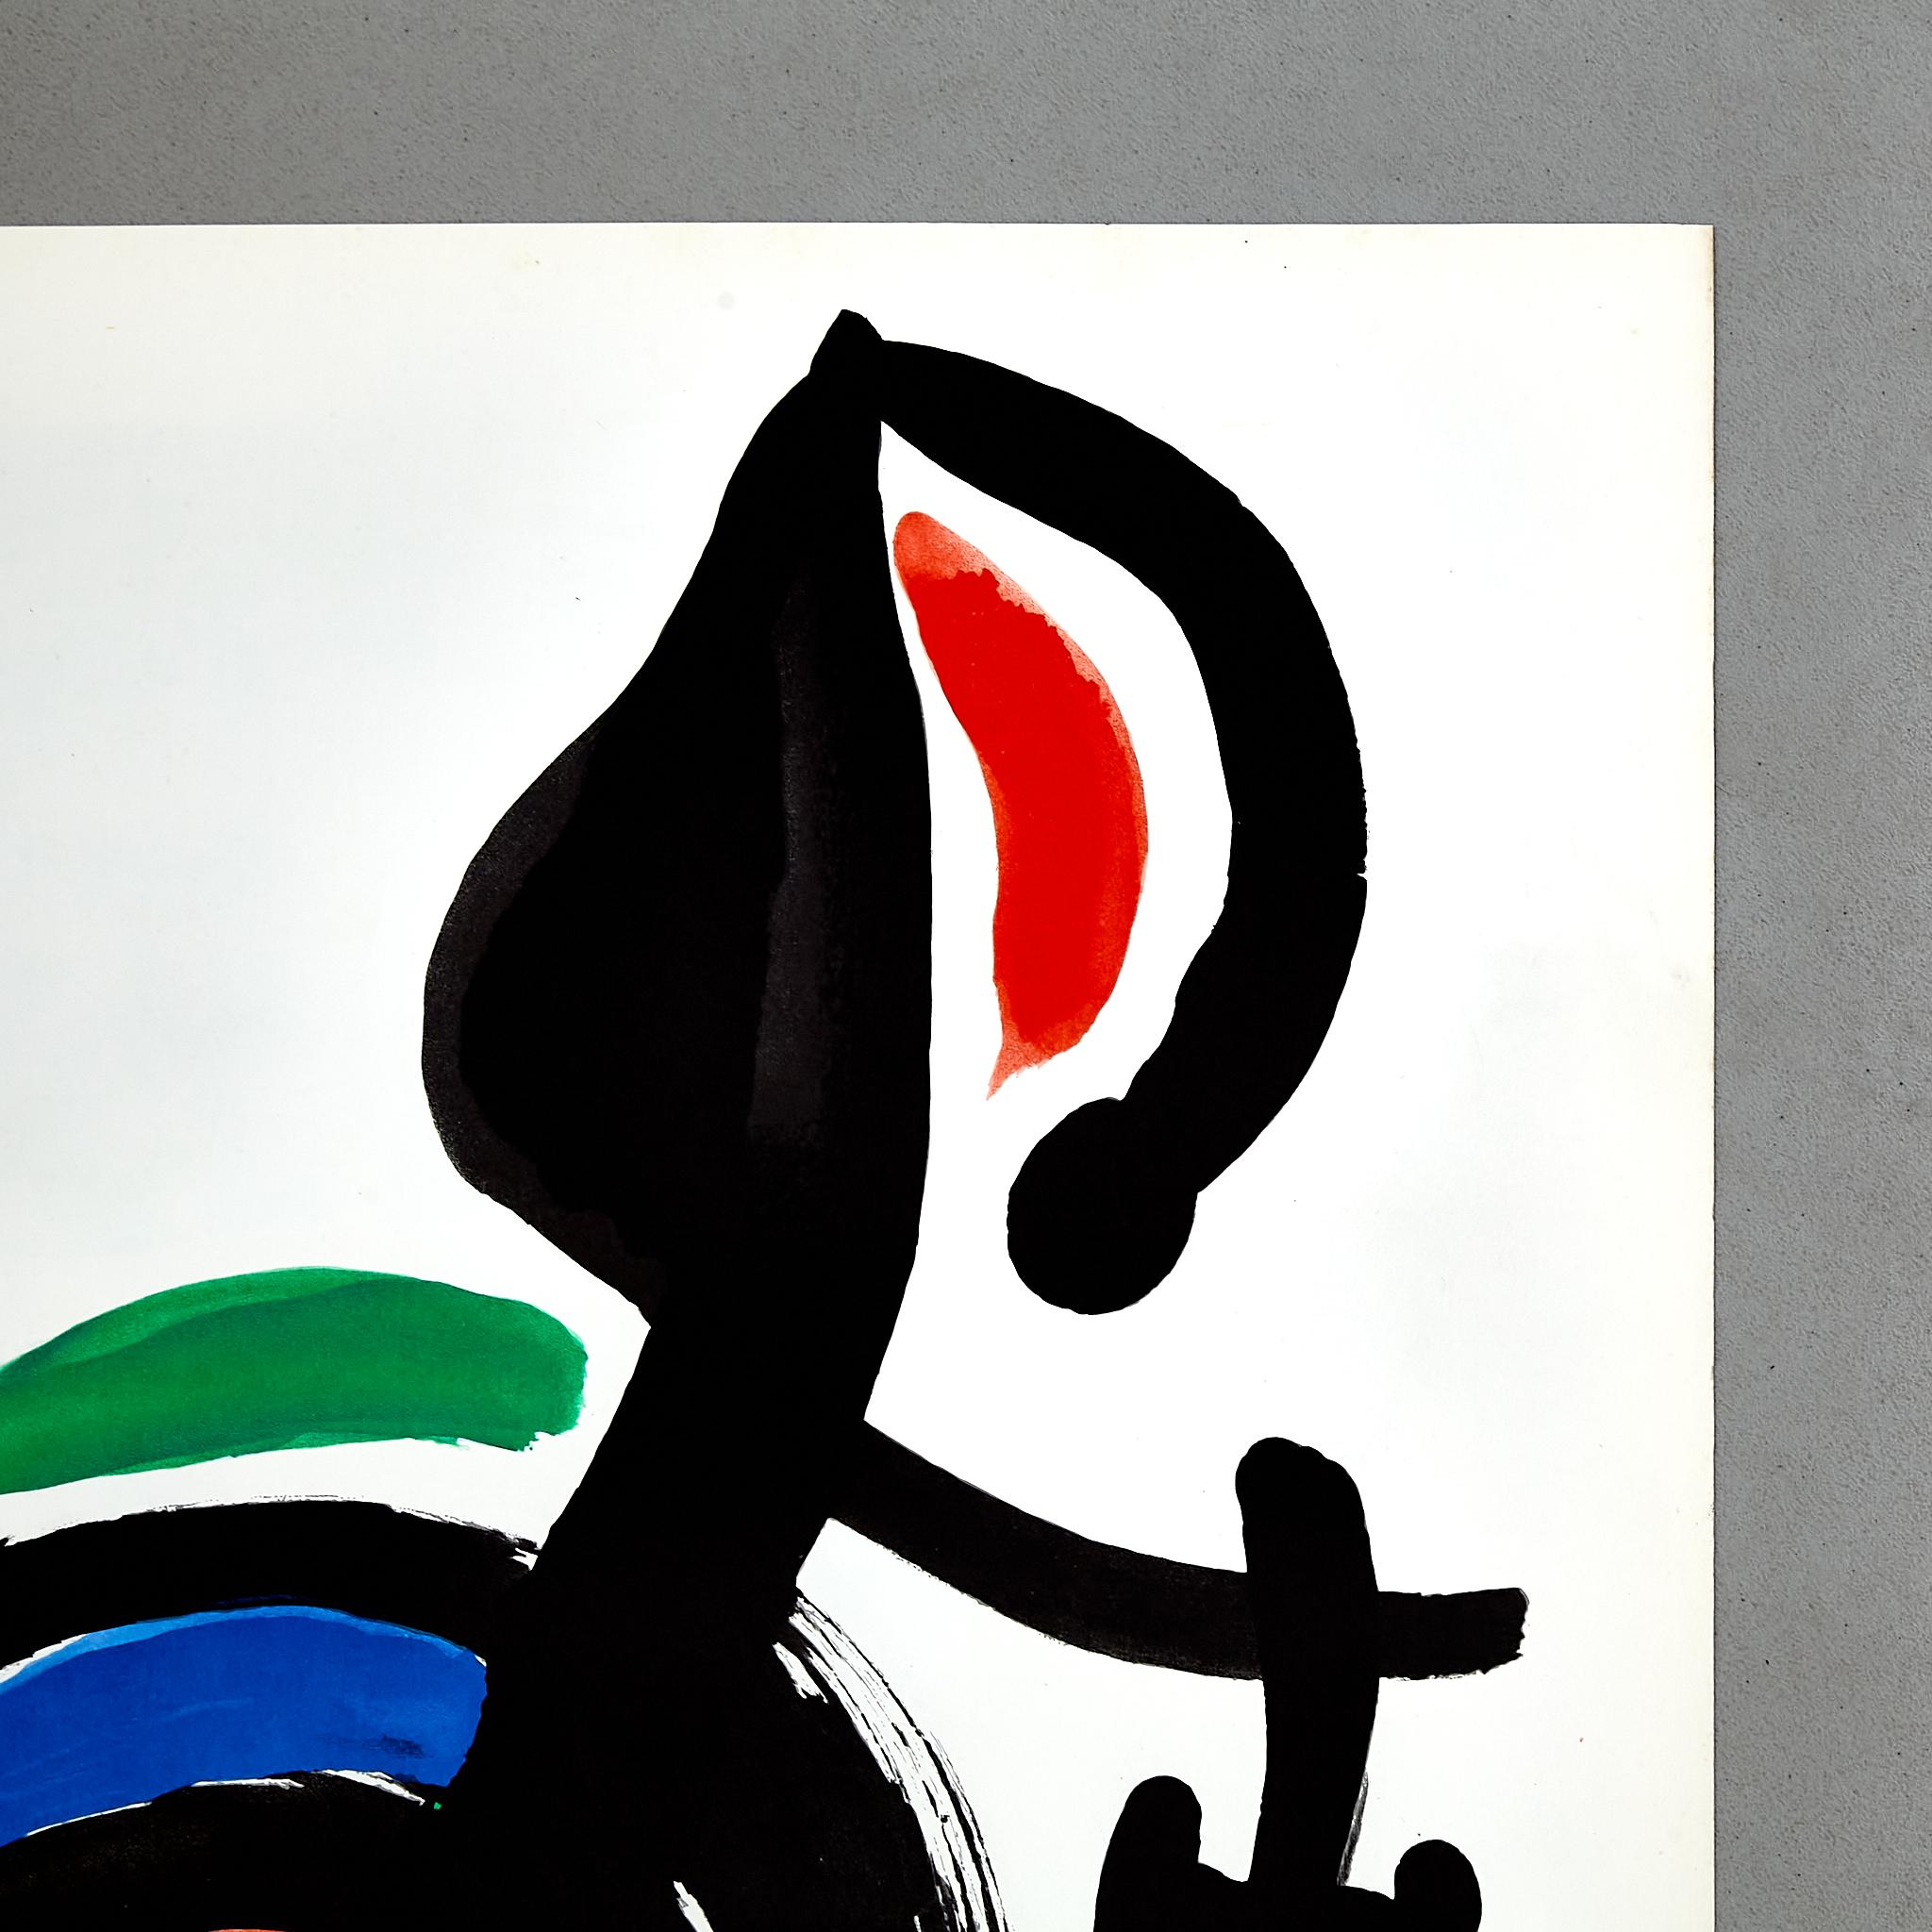 Spanish  High Quality Fine Art Color Lithography by Joan Miró, circa 1960. For Sale